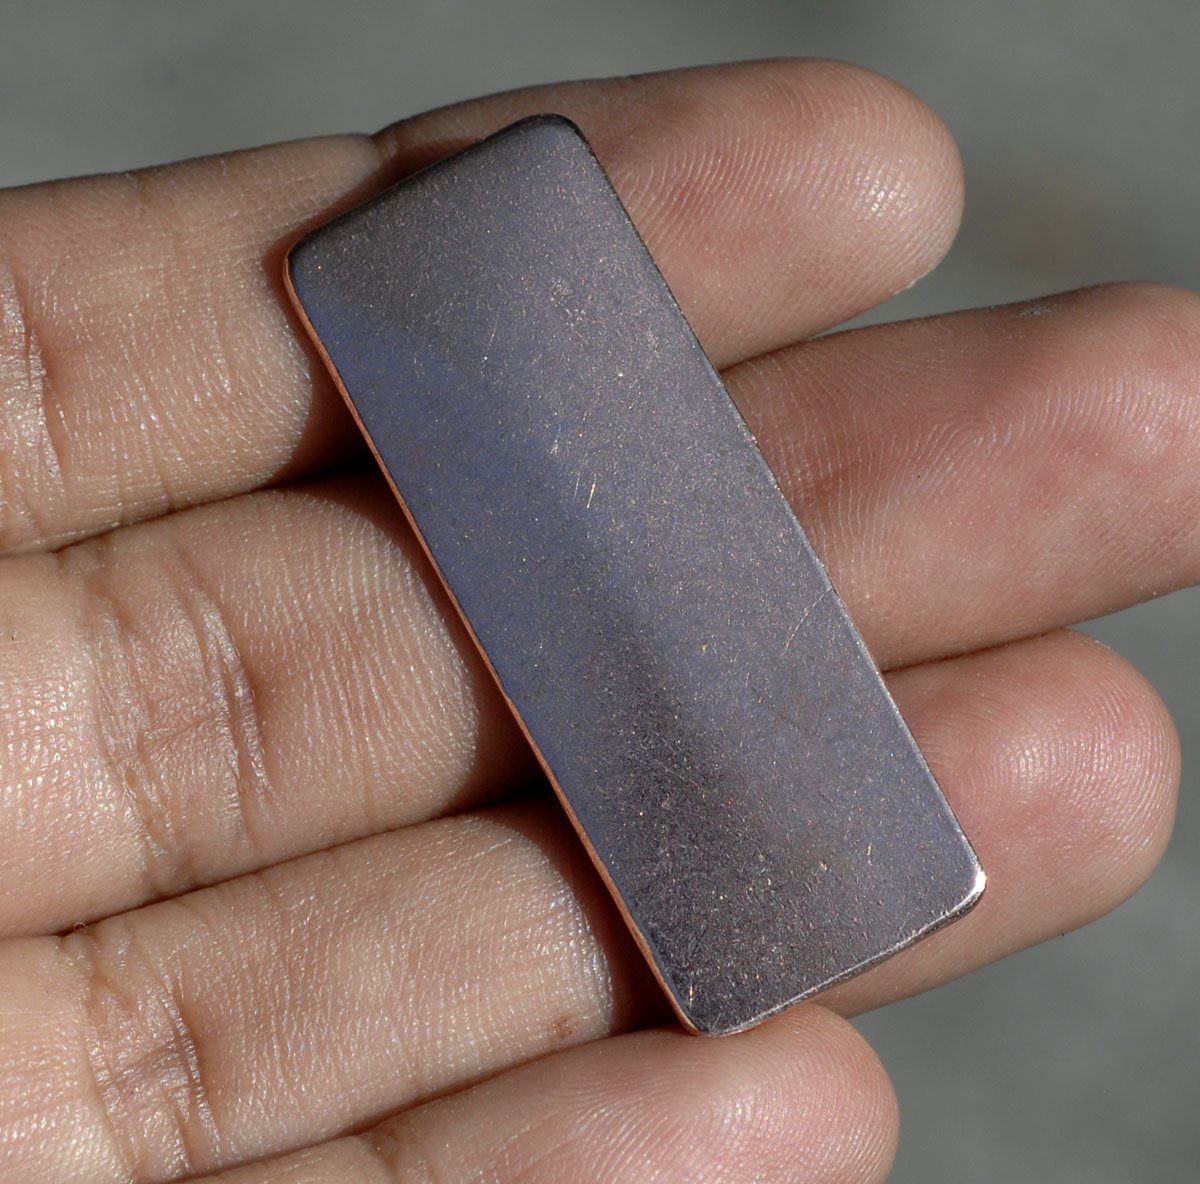 Rectangle 40mm x 15mm Blank Cutout Shape  for Enameling Stamping Texturing Blanks - Variety of Metals